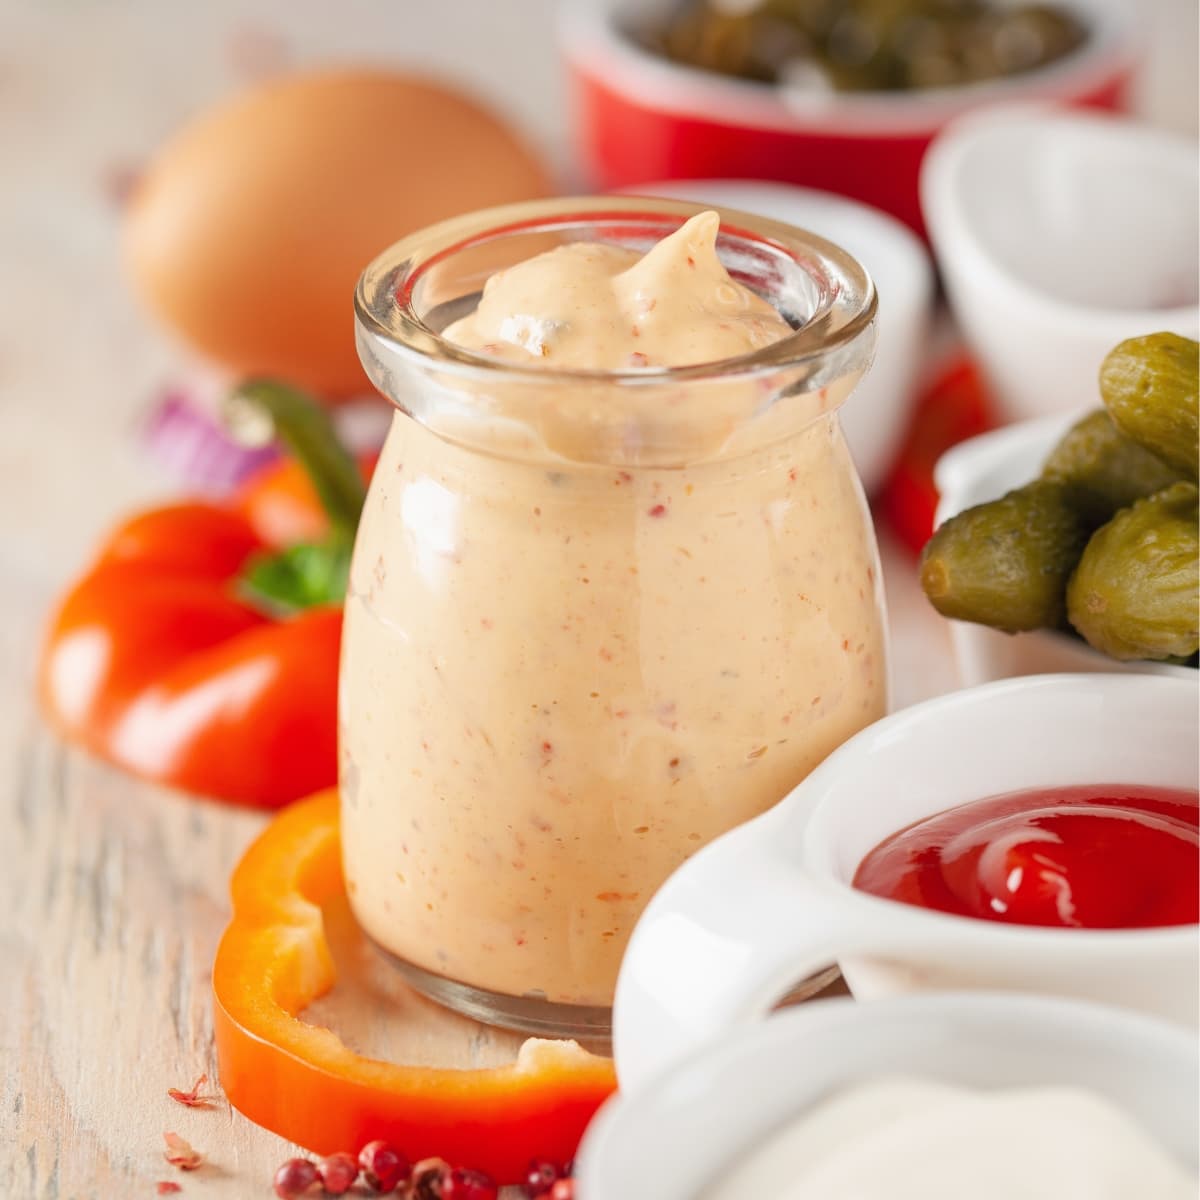 A Jar of Thousand Island Dressing with Ketchup, Pickle Relish, Onions and Other Ingredients